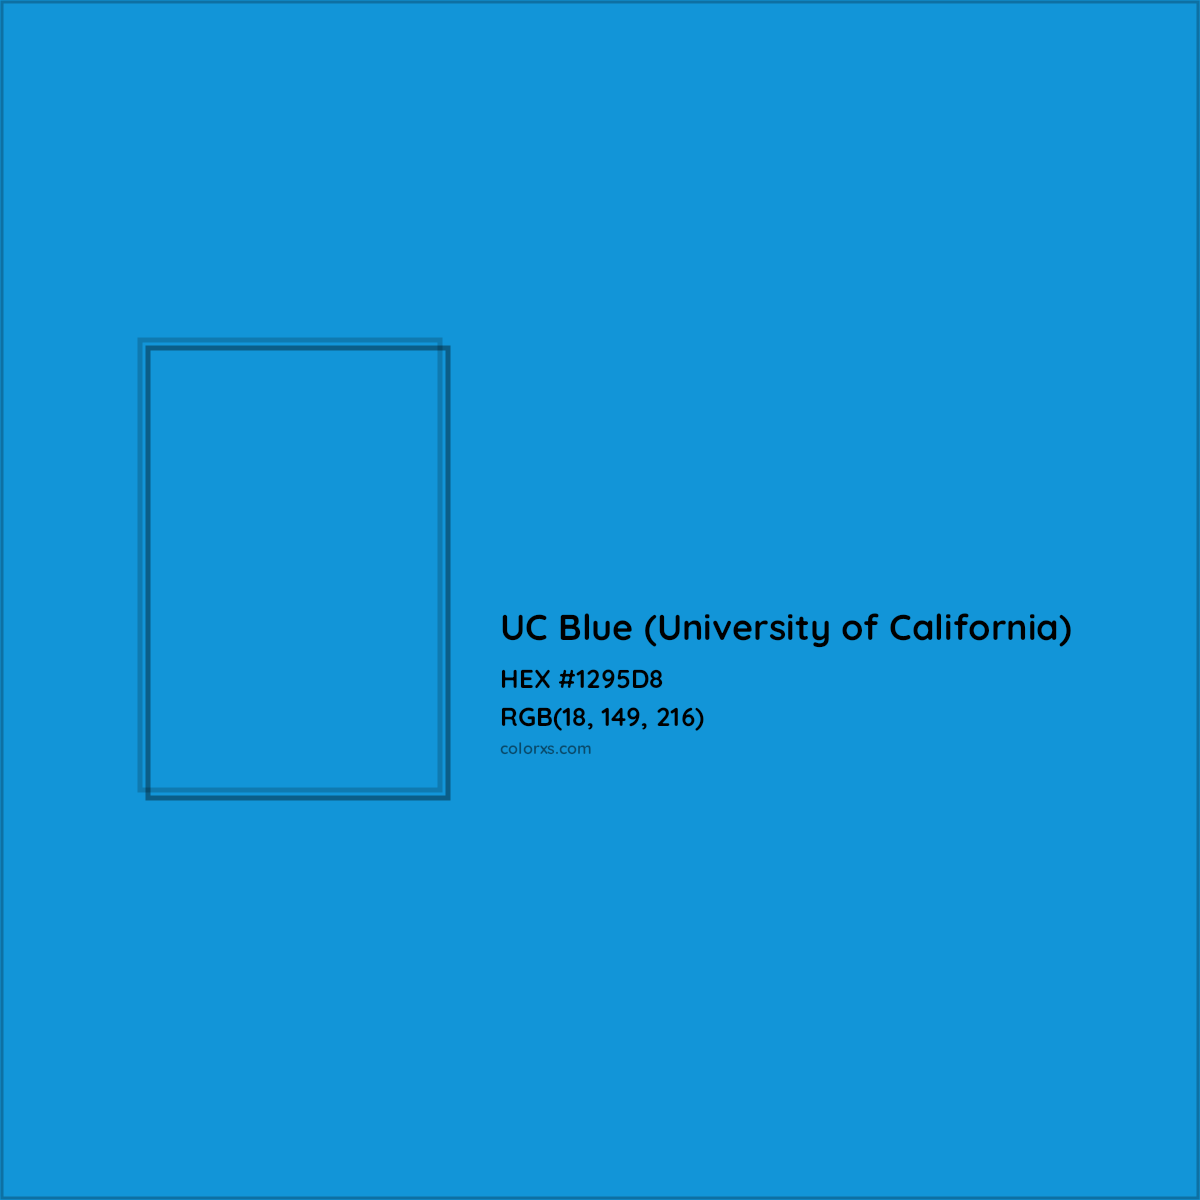 HEX #1295D8 UC Blue (University of California) Other School - Color Code